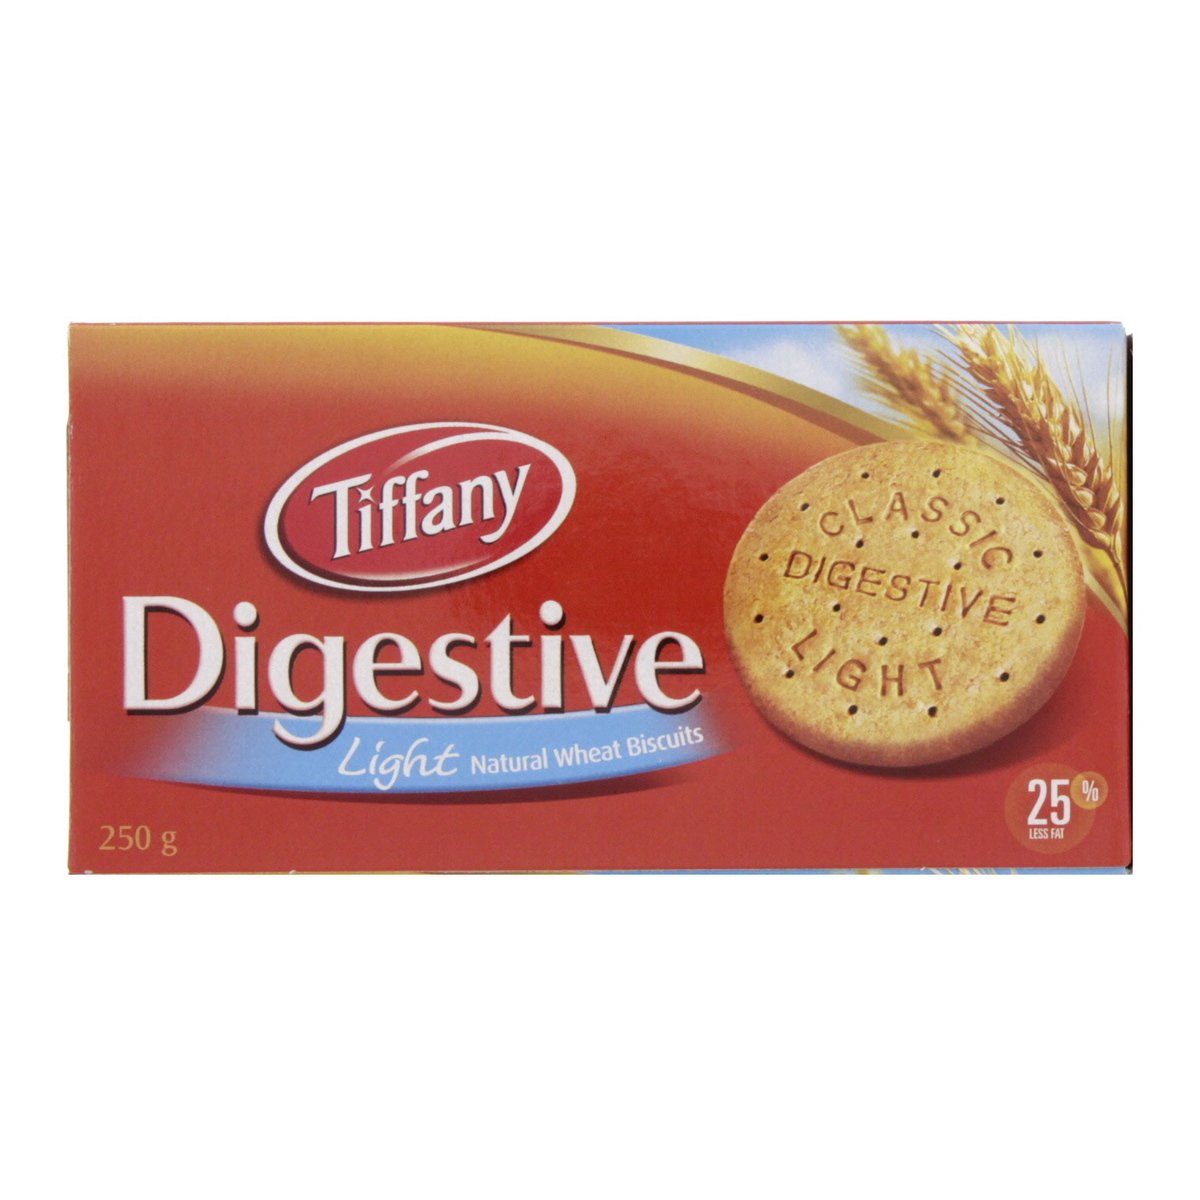 Tiffany Digestive Light Natural Wheat Biscuits 250g